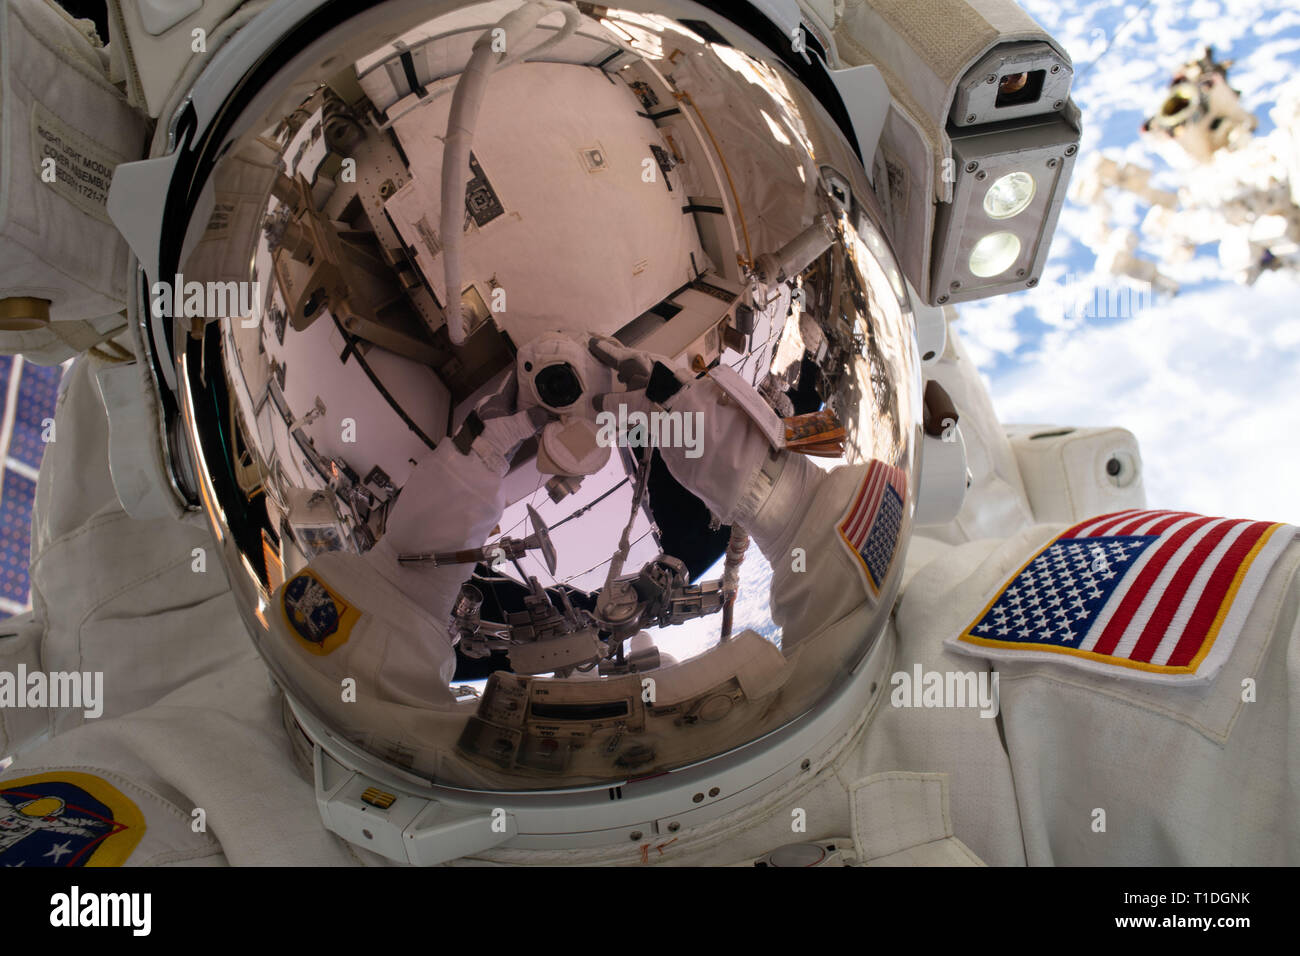 Expedition 59 NASA astronaut Nick Hague takes a selfie while working on the power supply during a spacewalk outside the International Space Station March 22, 2019 in Earth Orbit. Astronauts McClain and Hague spent six-hours and 39-minutes outside the space station to upgrade the orbital complex's power storage capacity. Stock Photo